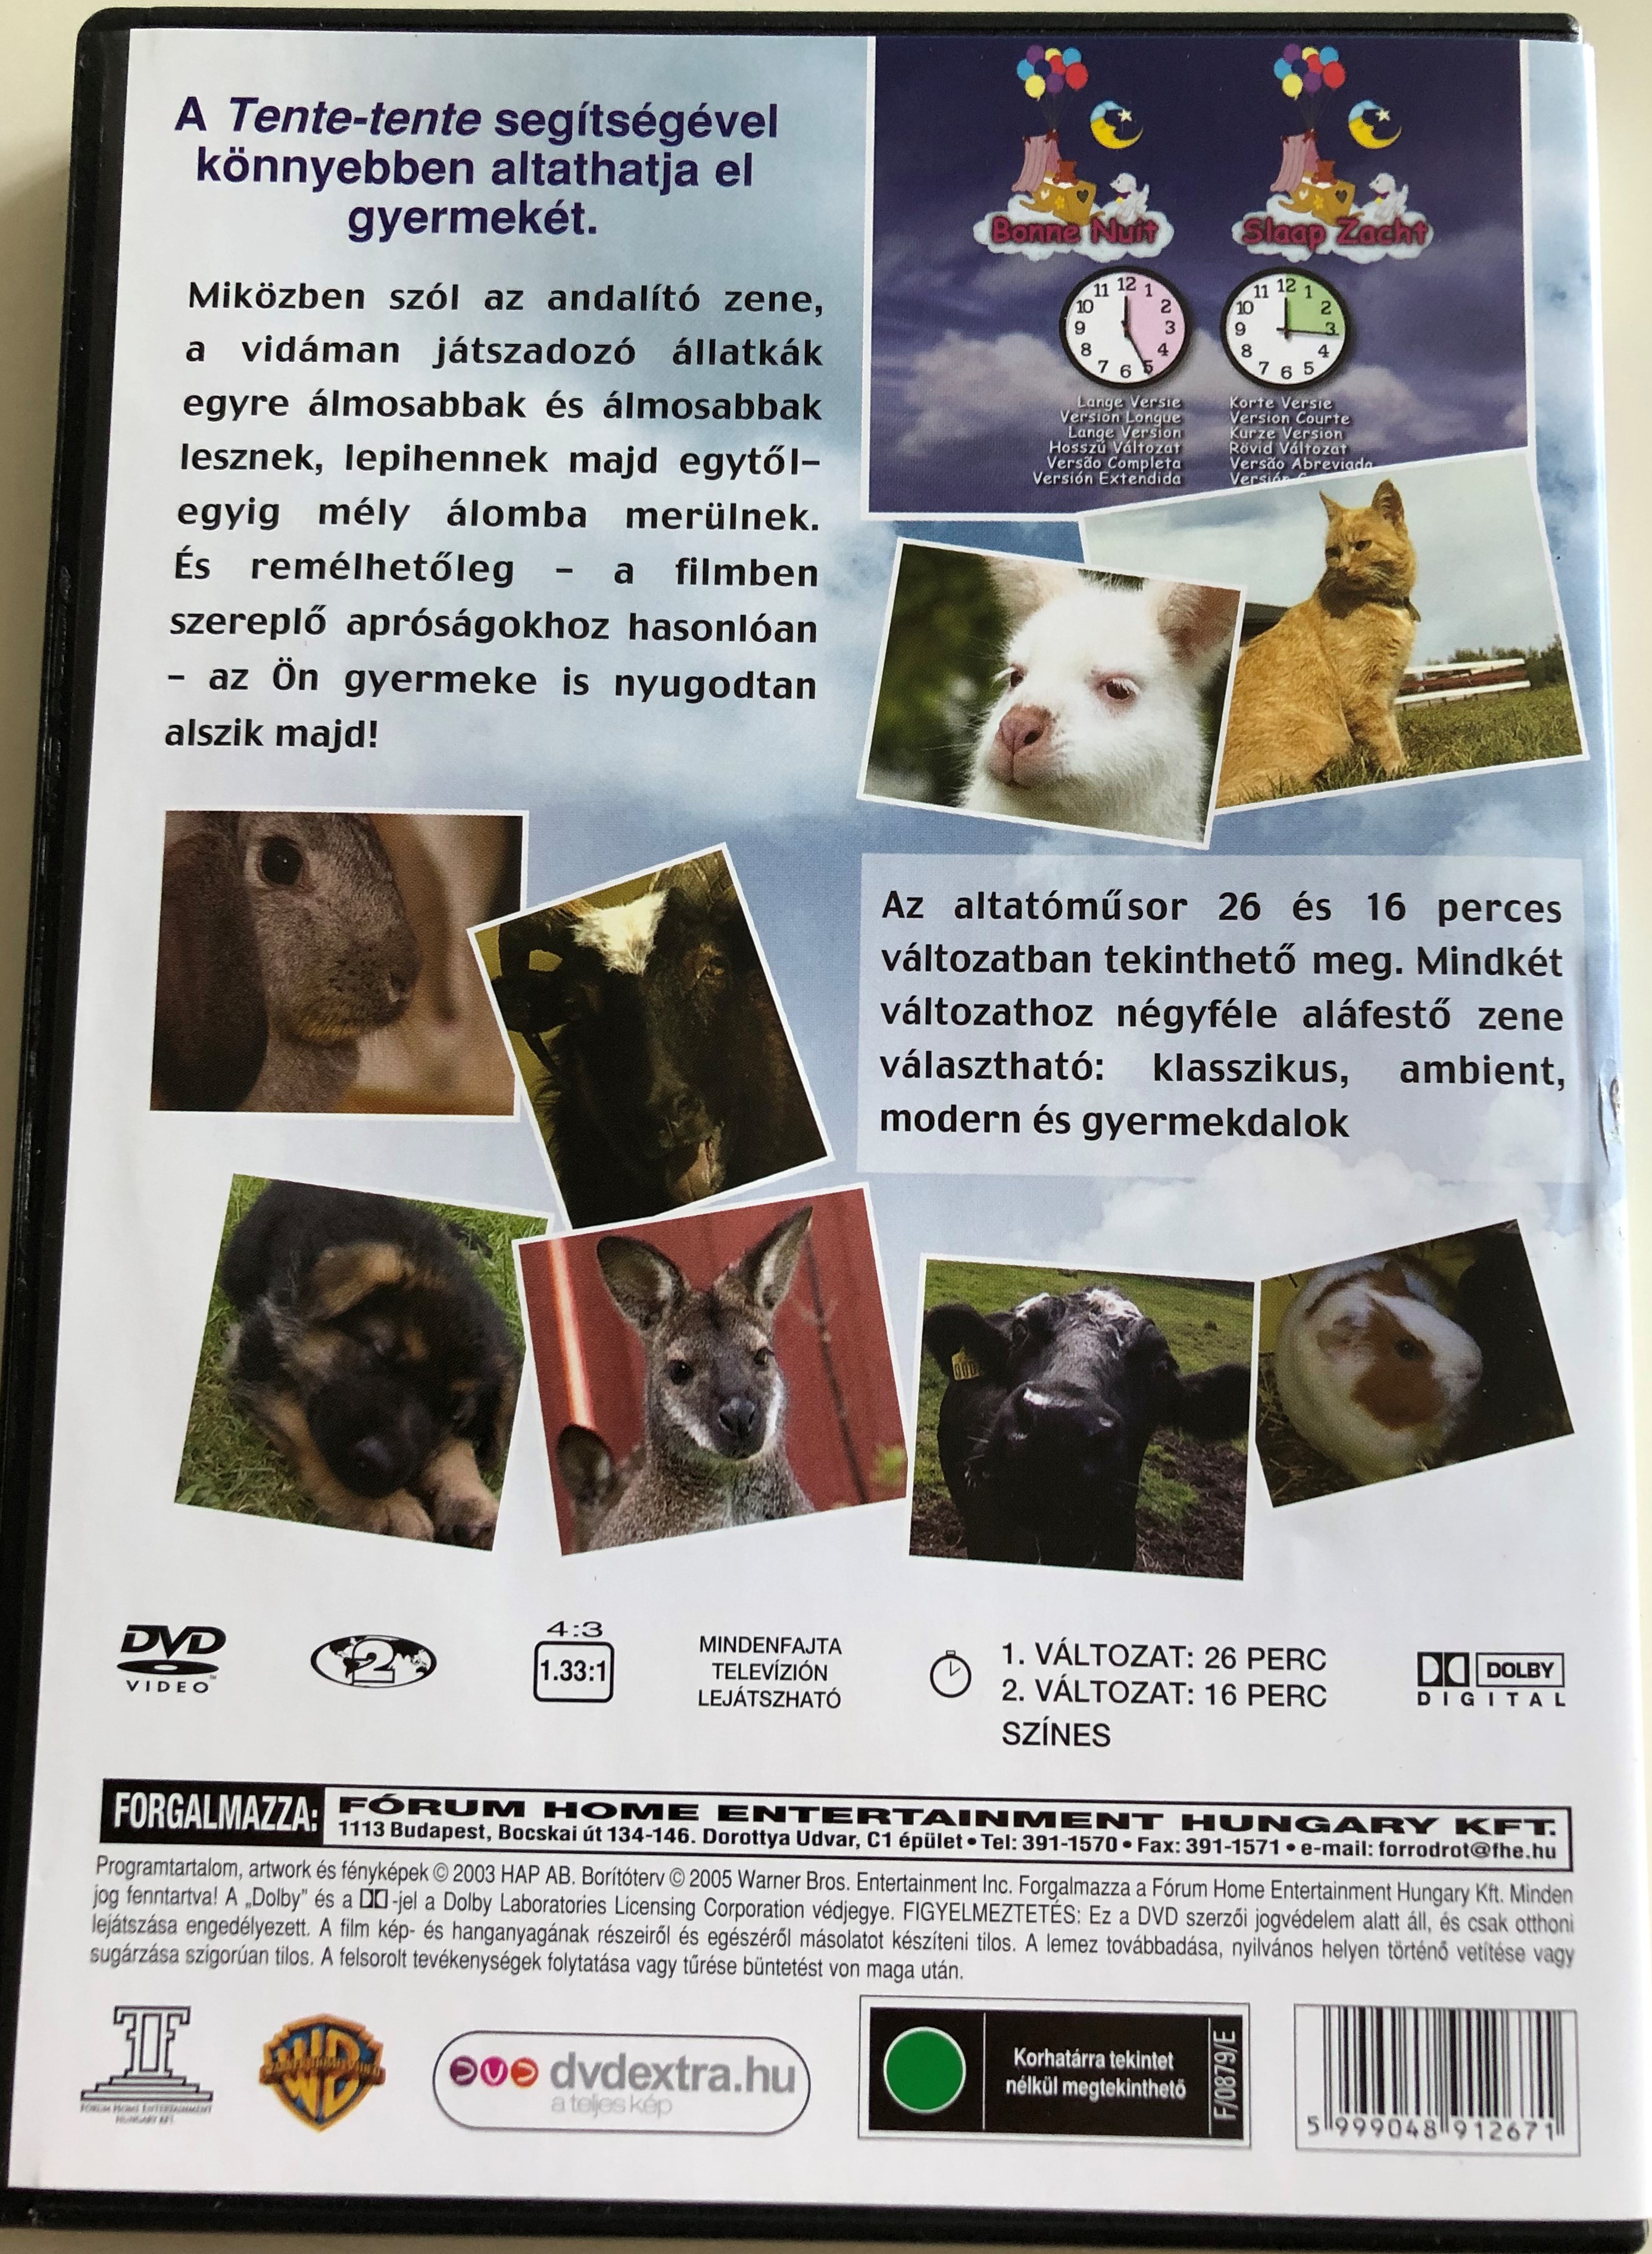 natti-natti-tente-tente-dvd-2003-ringassa-lomba-gyermek-t-a-k-pek-s-a-hangok-var-zsa-seg-ts-g-vel-animal-themed-video-lullaby-for-your-toddlers-with-classical-ambient-and-modern-music-2-.jpg